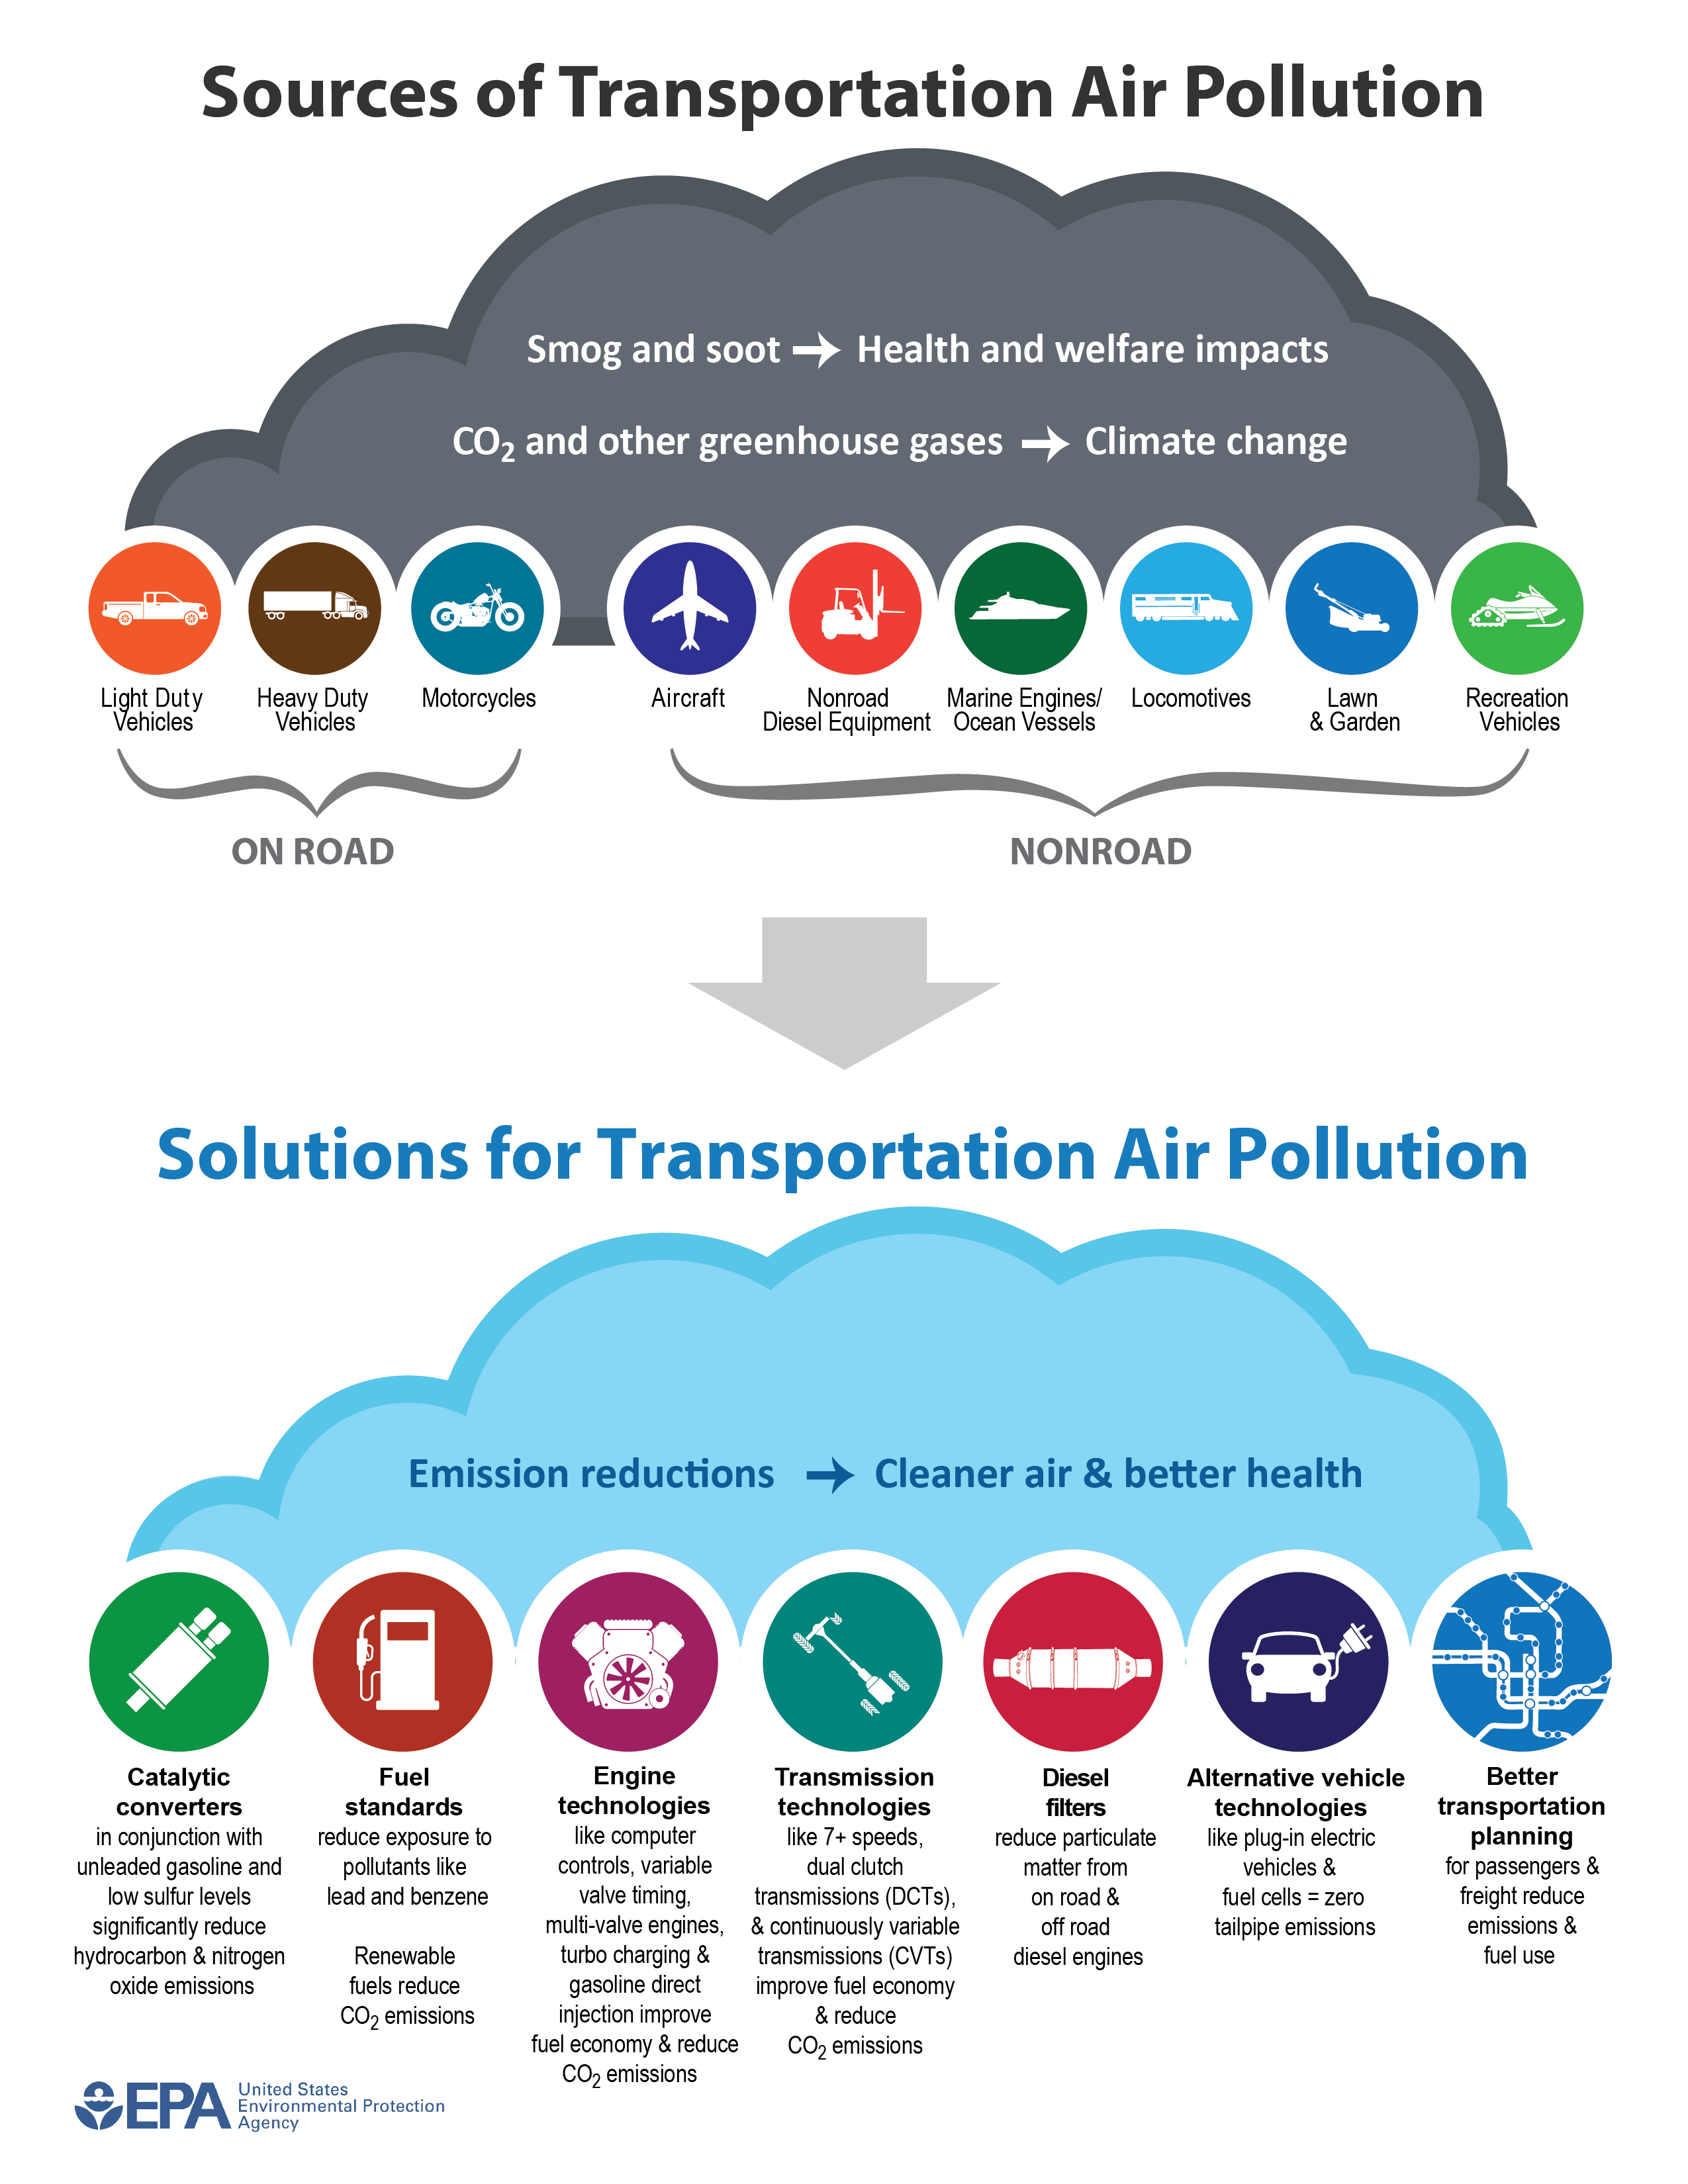 Sources of air pollution cause: PM = soot = lung problems; CO2 = greenhouse gas = climate change; CO, NOx, SOx, &amp; VOC = smog = asthma and poor air quality/visibility. Solutions provide emission reductions that equal human and environmental health gains.